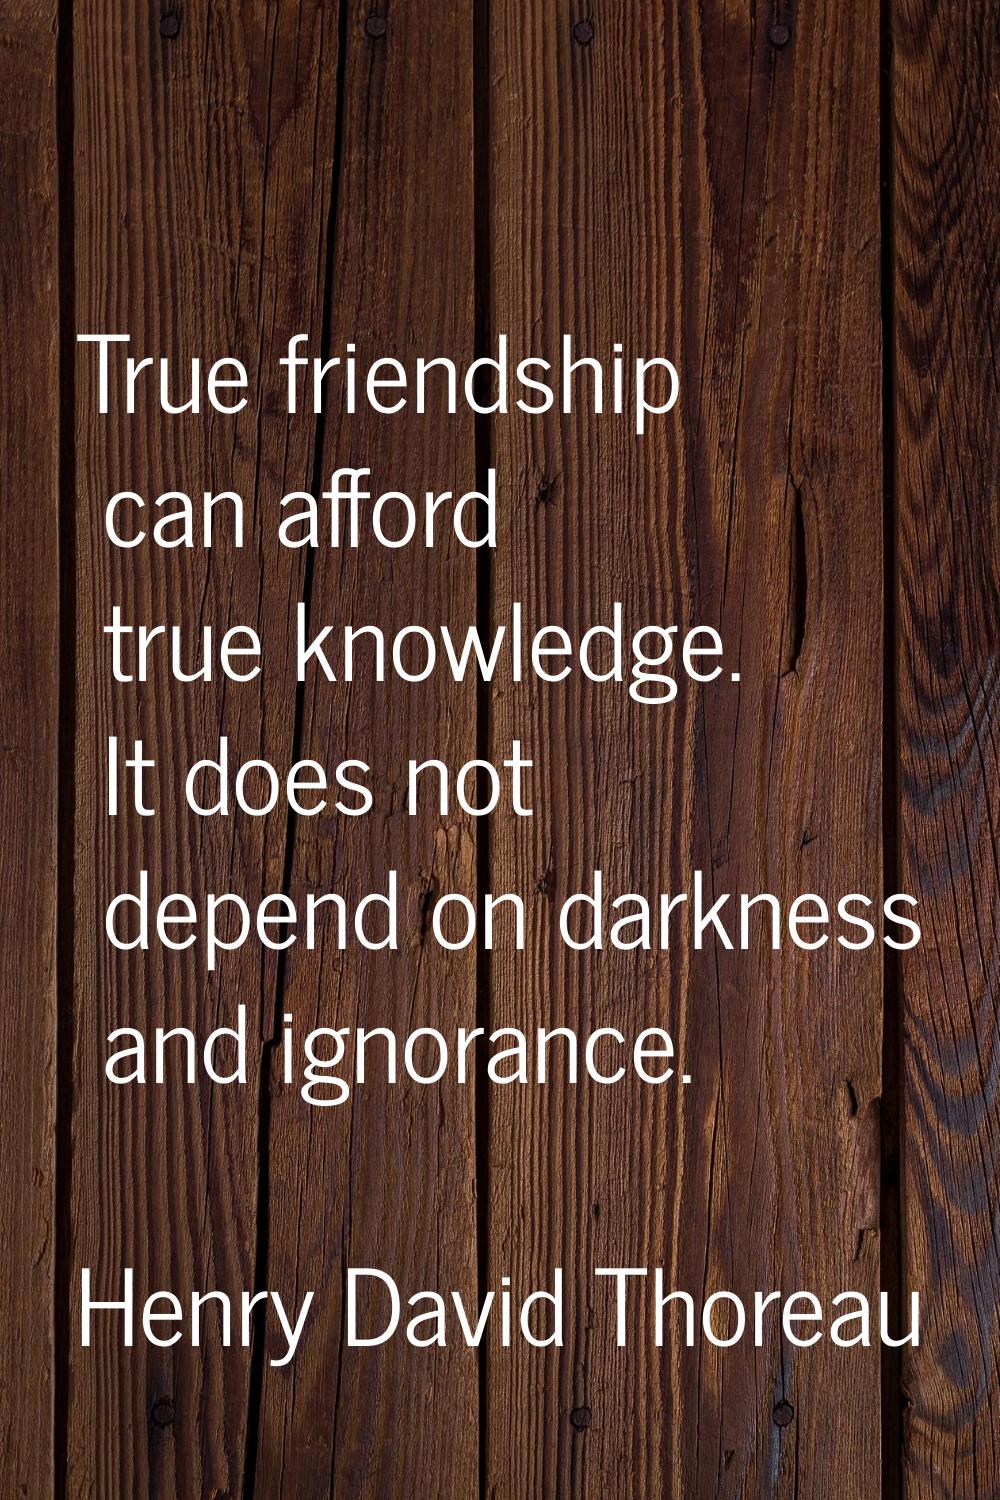 True friendship can afford true knowledge. It does not depend on darkness and ignorance.